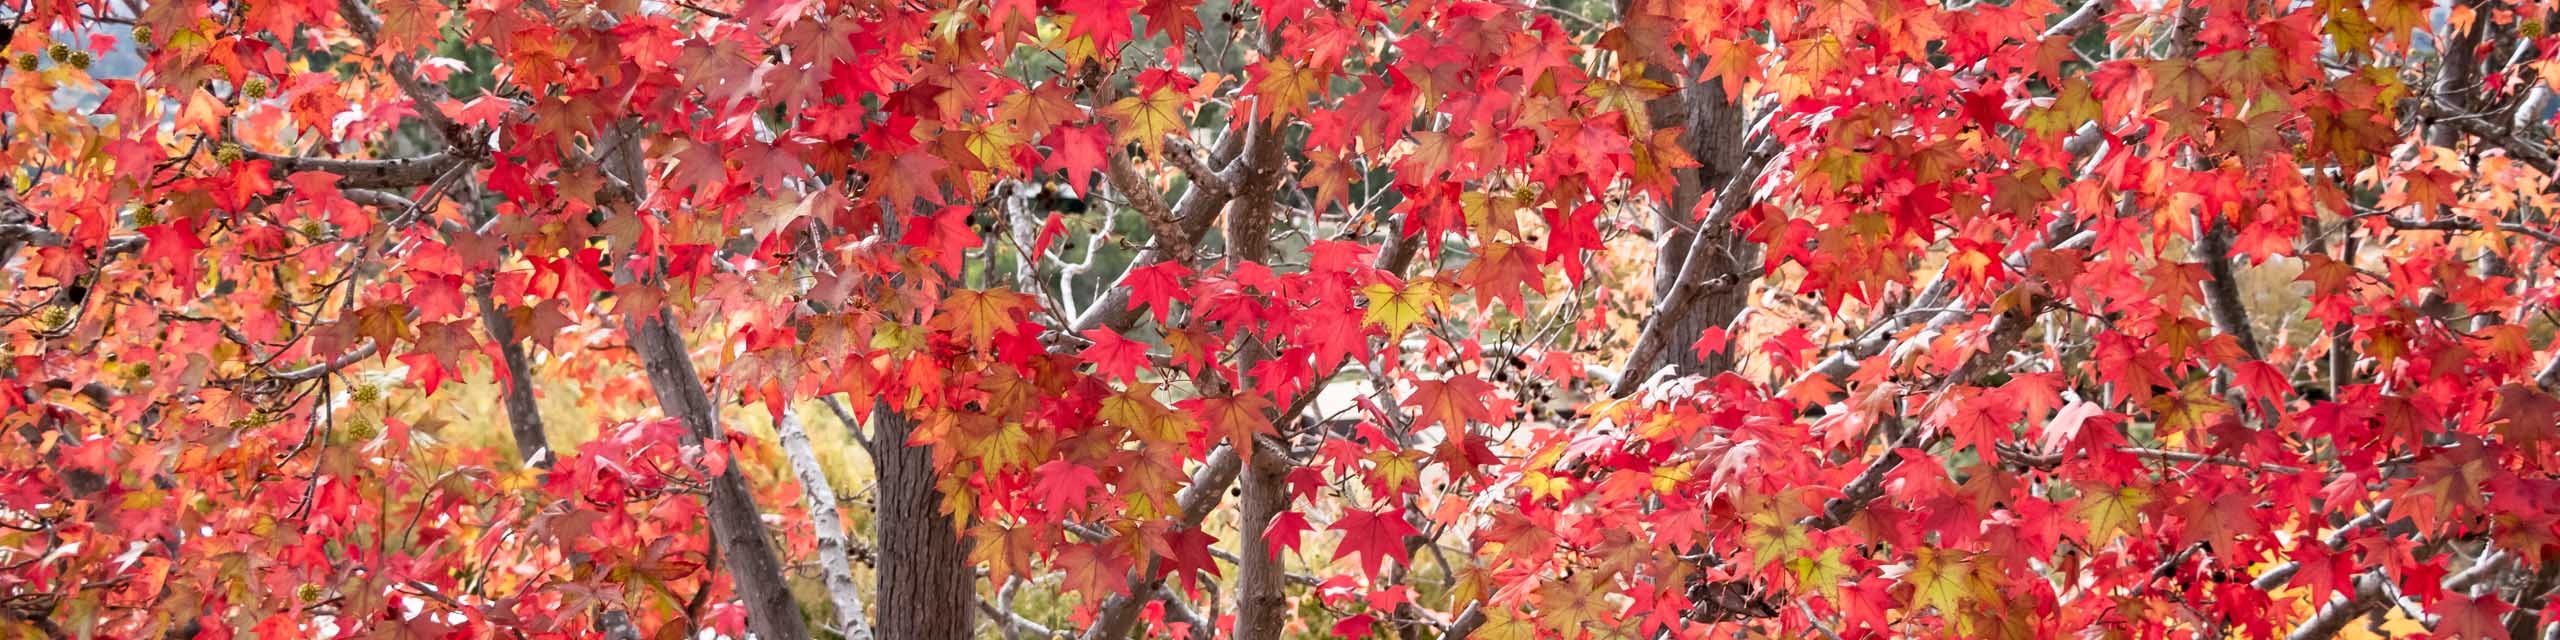 Cropped in area of a sugar maple with red autumn leaves.